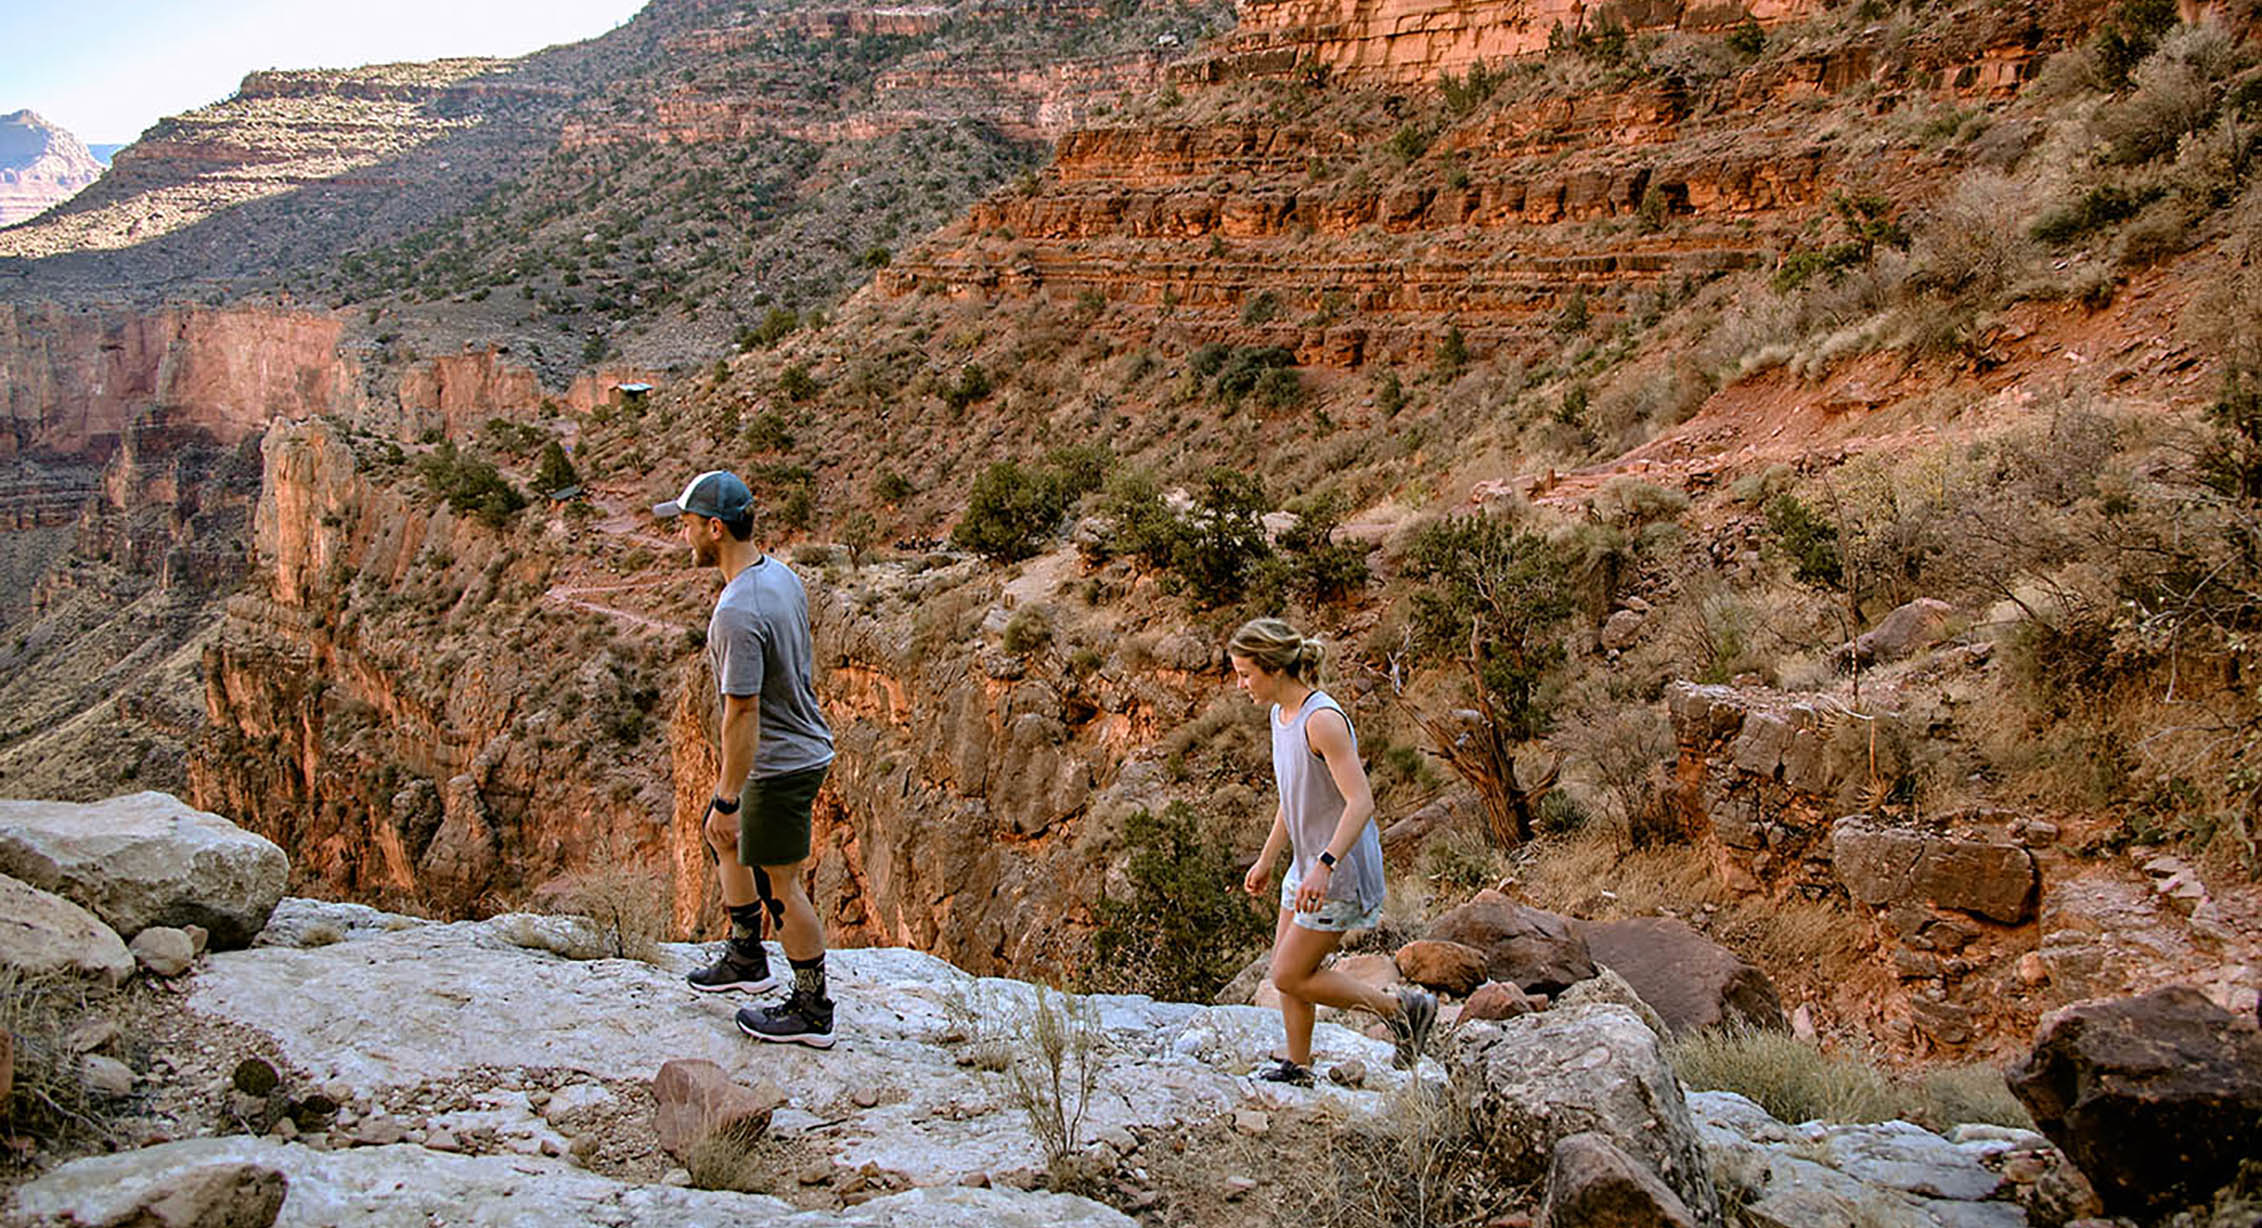 Hiking in Grand Canyon National Park with KEEN hiking boots